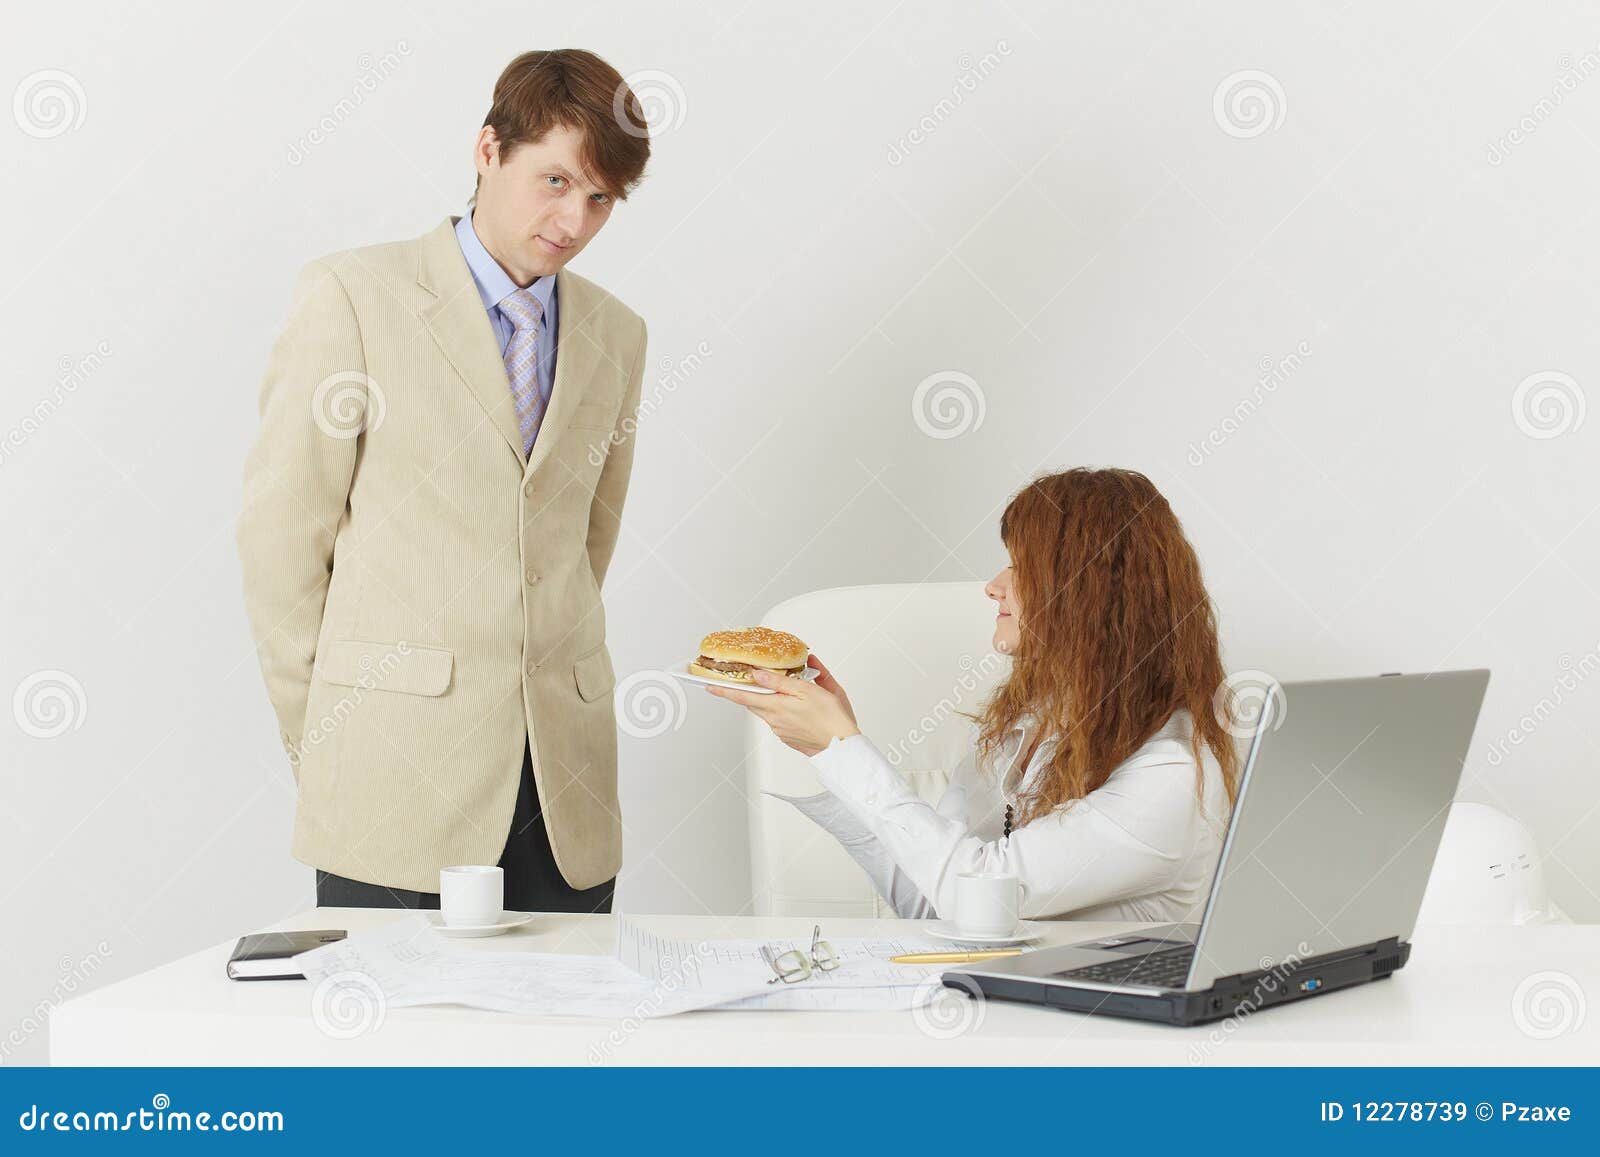 Two Businessmen During Lunch Break Stock Image - Image of blue